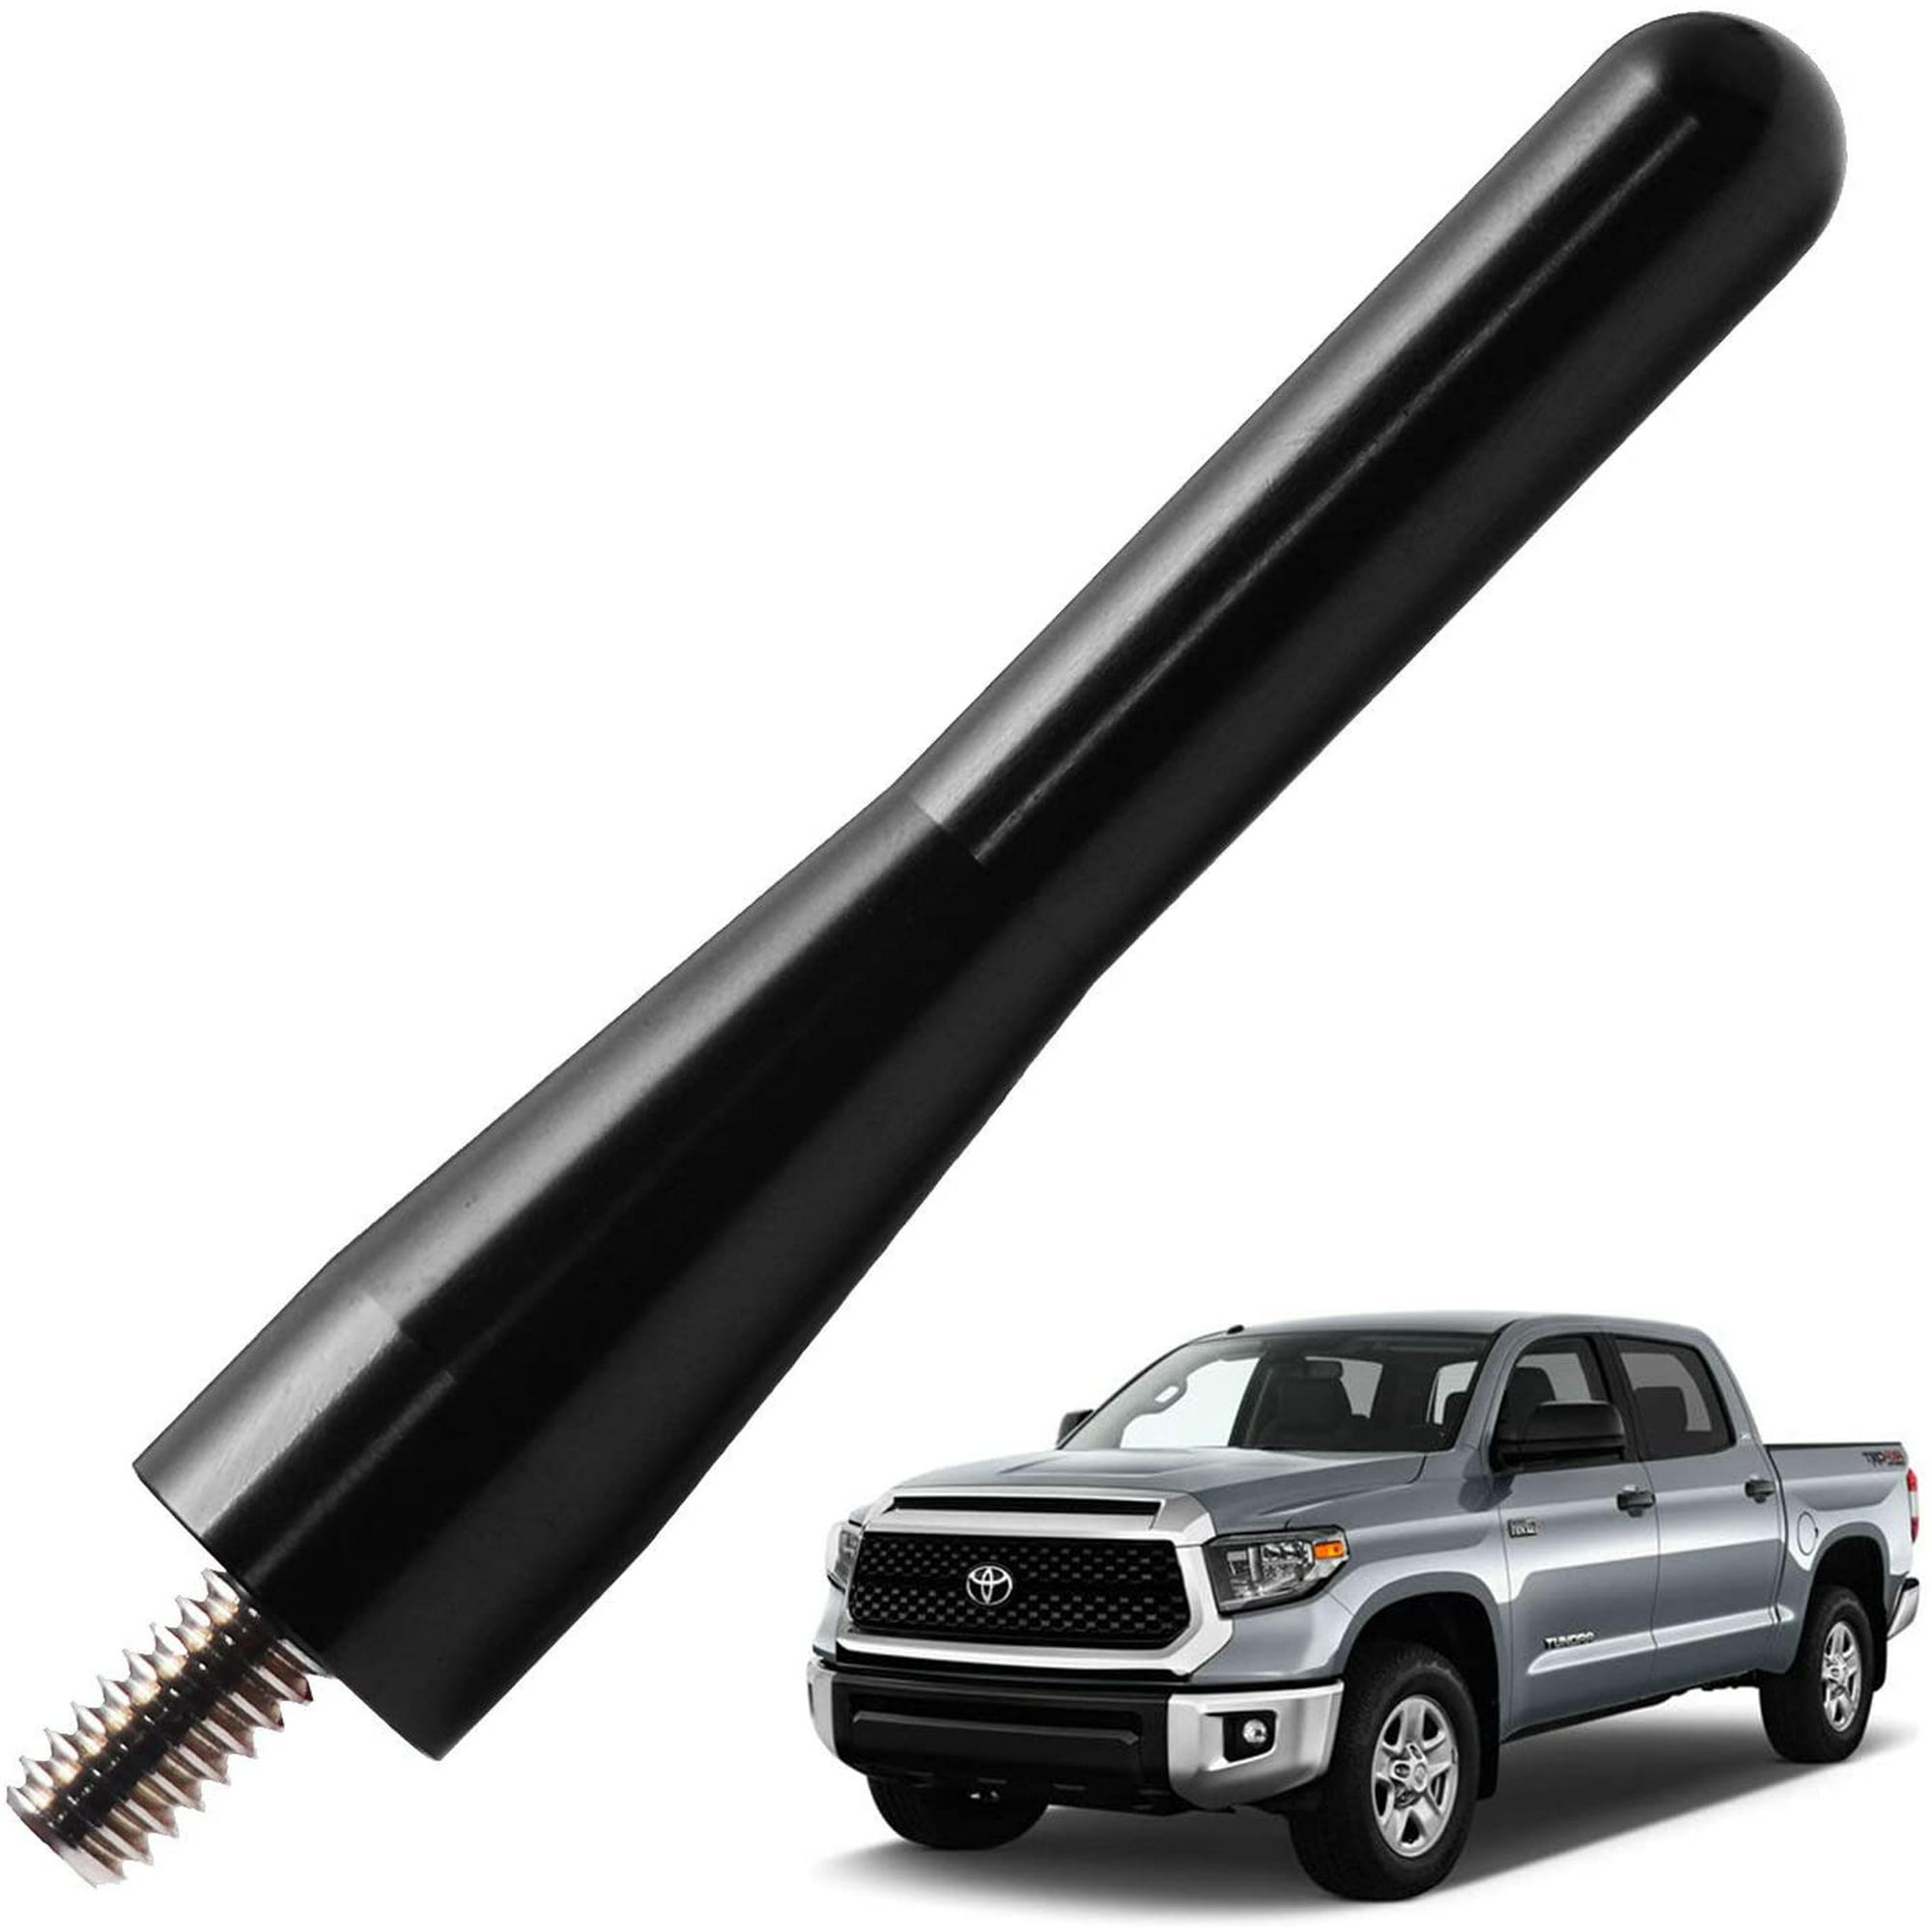 JAPower Replacement Antenna Compatible with Ford Focus 2008-2018 5.25 inches-Black 